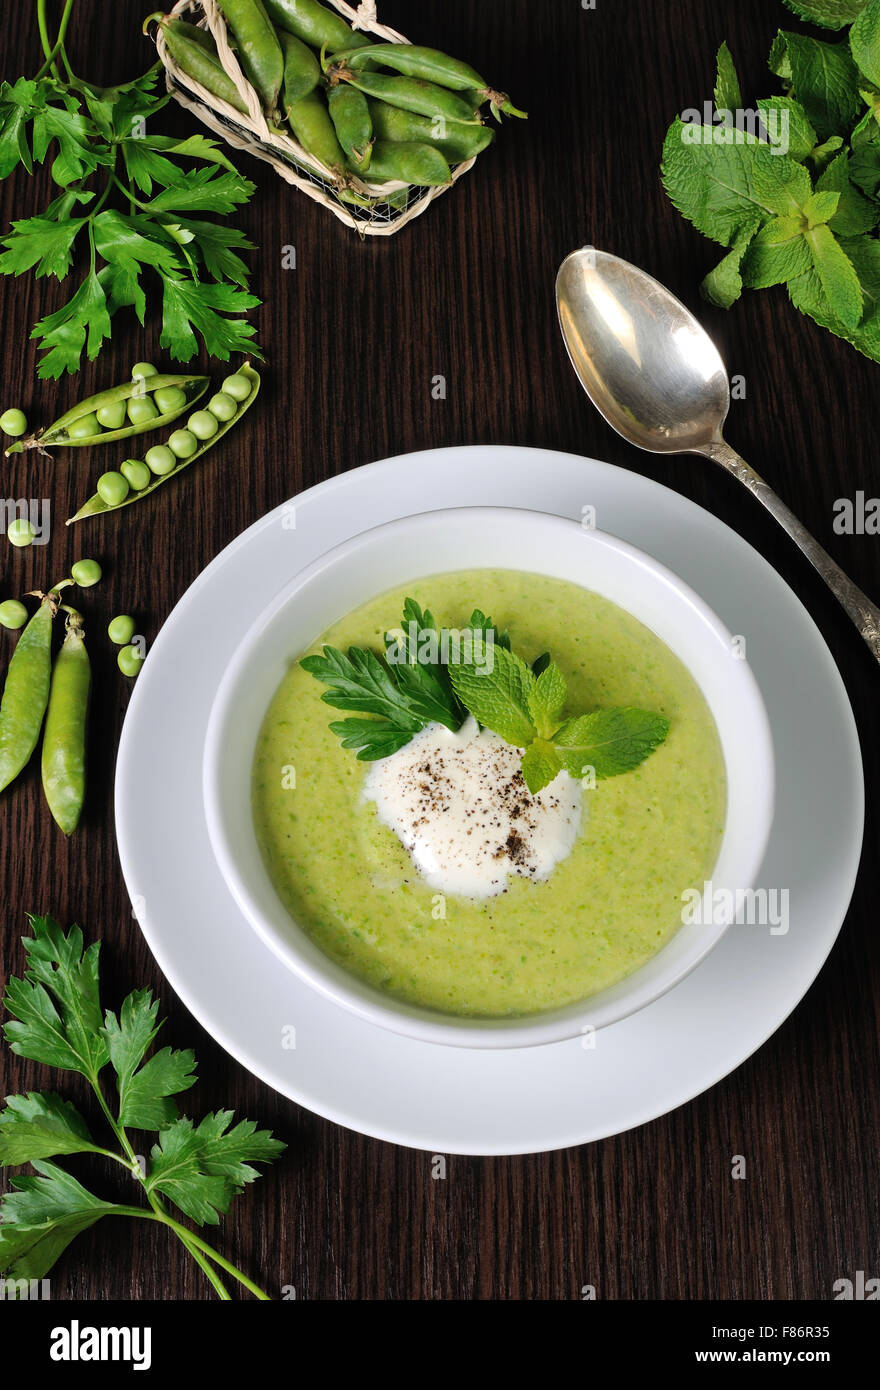 Portion cream soup with green peas with mint cream Stock Photo